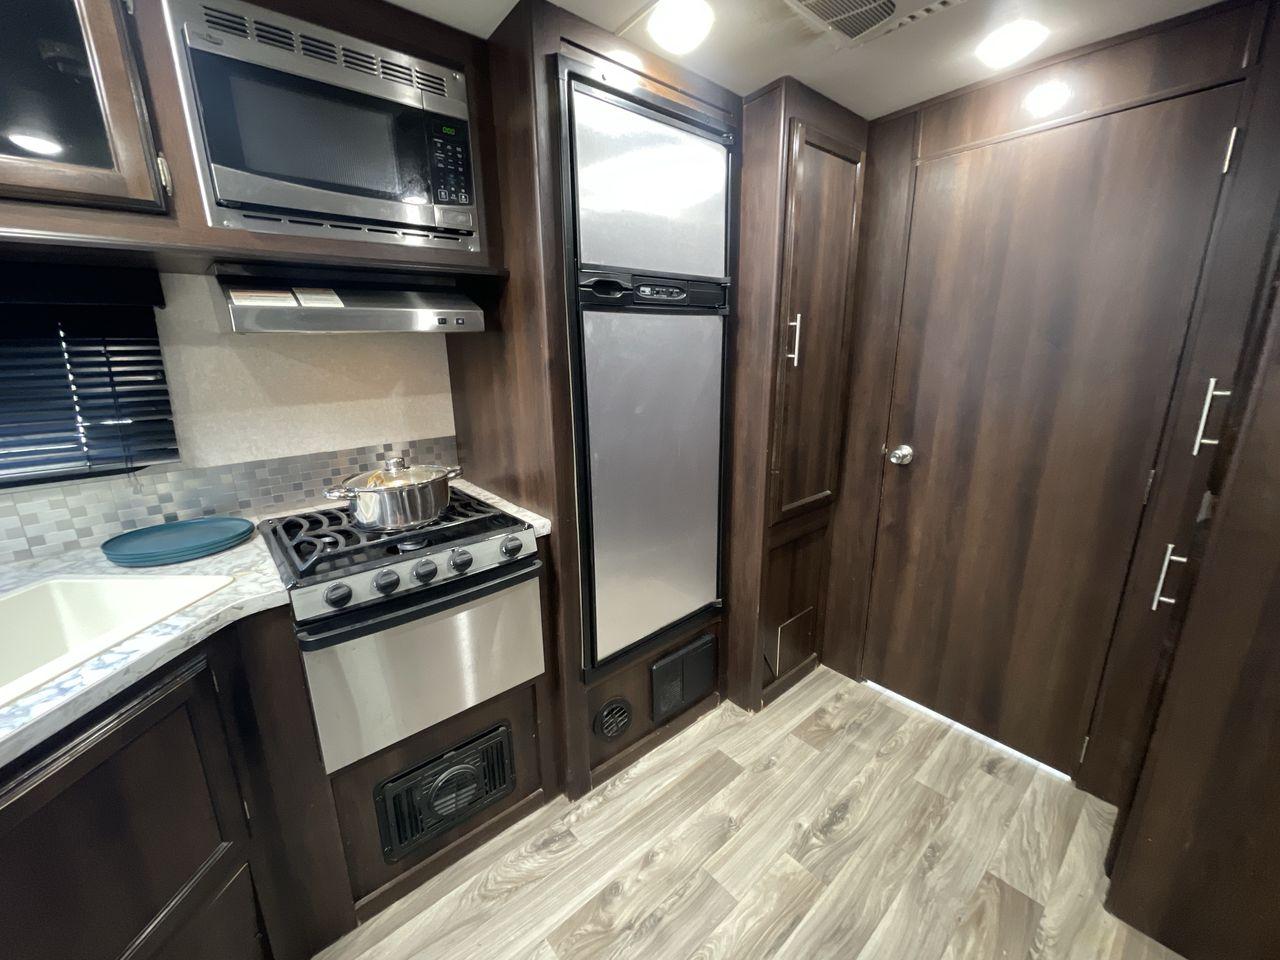 2018 WHITE JAYCO JAY FLIGHT 23MRB (1UJBJ0BN5J1) , Length: 28.17 ft | Dry Weight: 5,560 lbs. | Gross Weight: 7,250 lbs. | Slides: 1 transmission, located at 4319 N Main Street, Cleburne, TX, 76033, (817) 221-0660, 32.435829, -97.384178 - The 2018 Jayco Jay Flight 23MRB is a travel trailer that encapsulates both compactness and luxury for unparalleled camping experiences. Spanning 28 feet in length, this model boasts a thoughtfully arranged interior featuring a single slide-out, seamlessly amplifying the living space. The Jay Flight - Photo #14